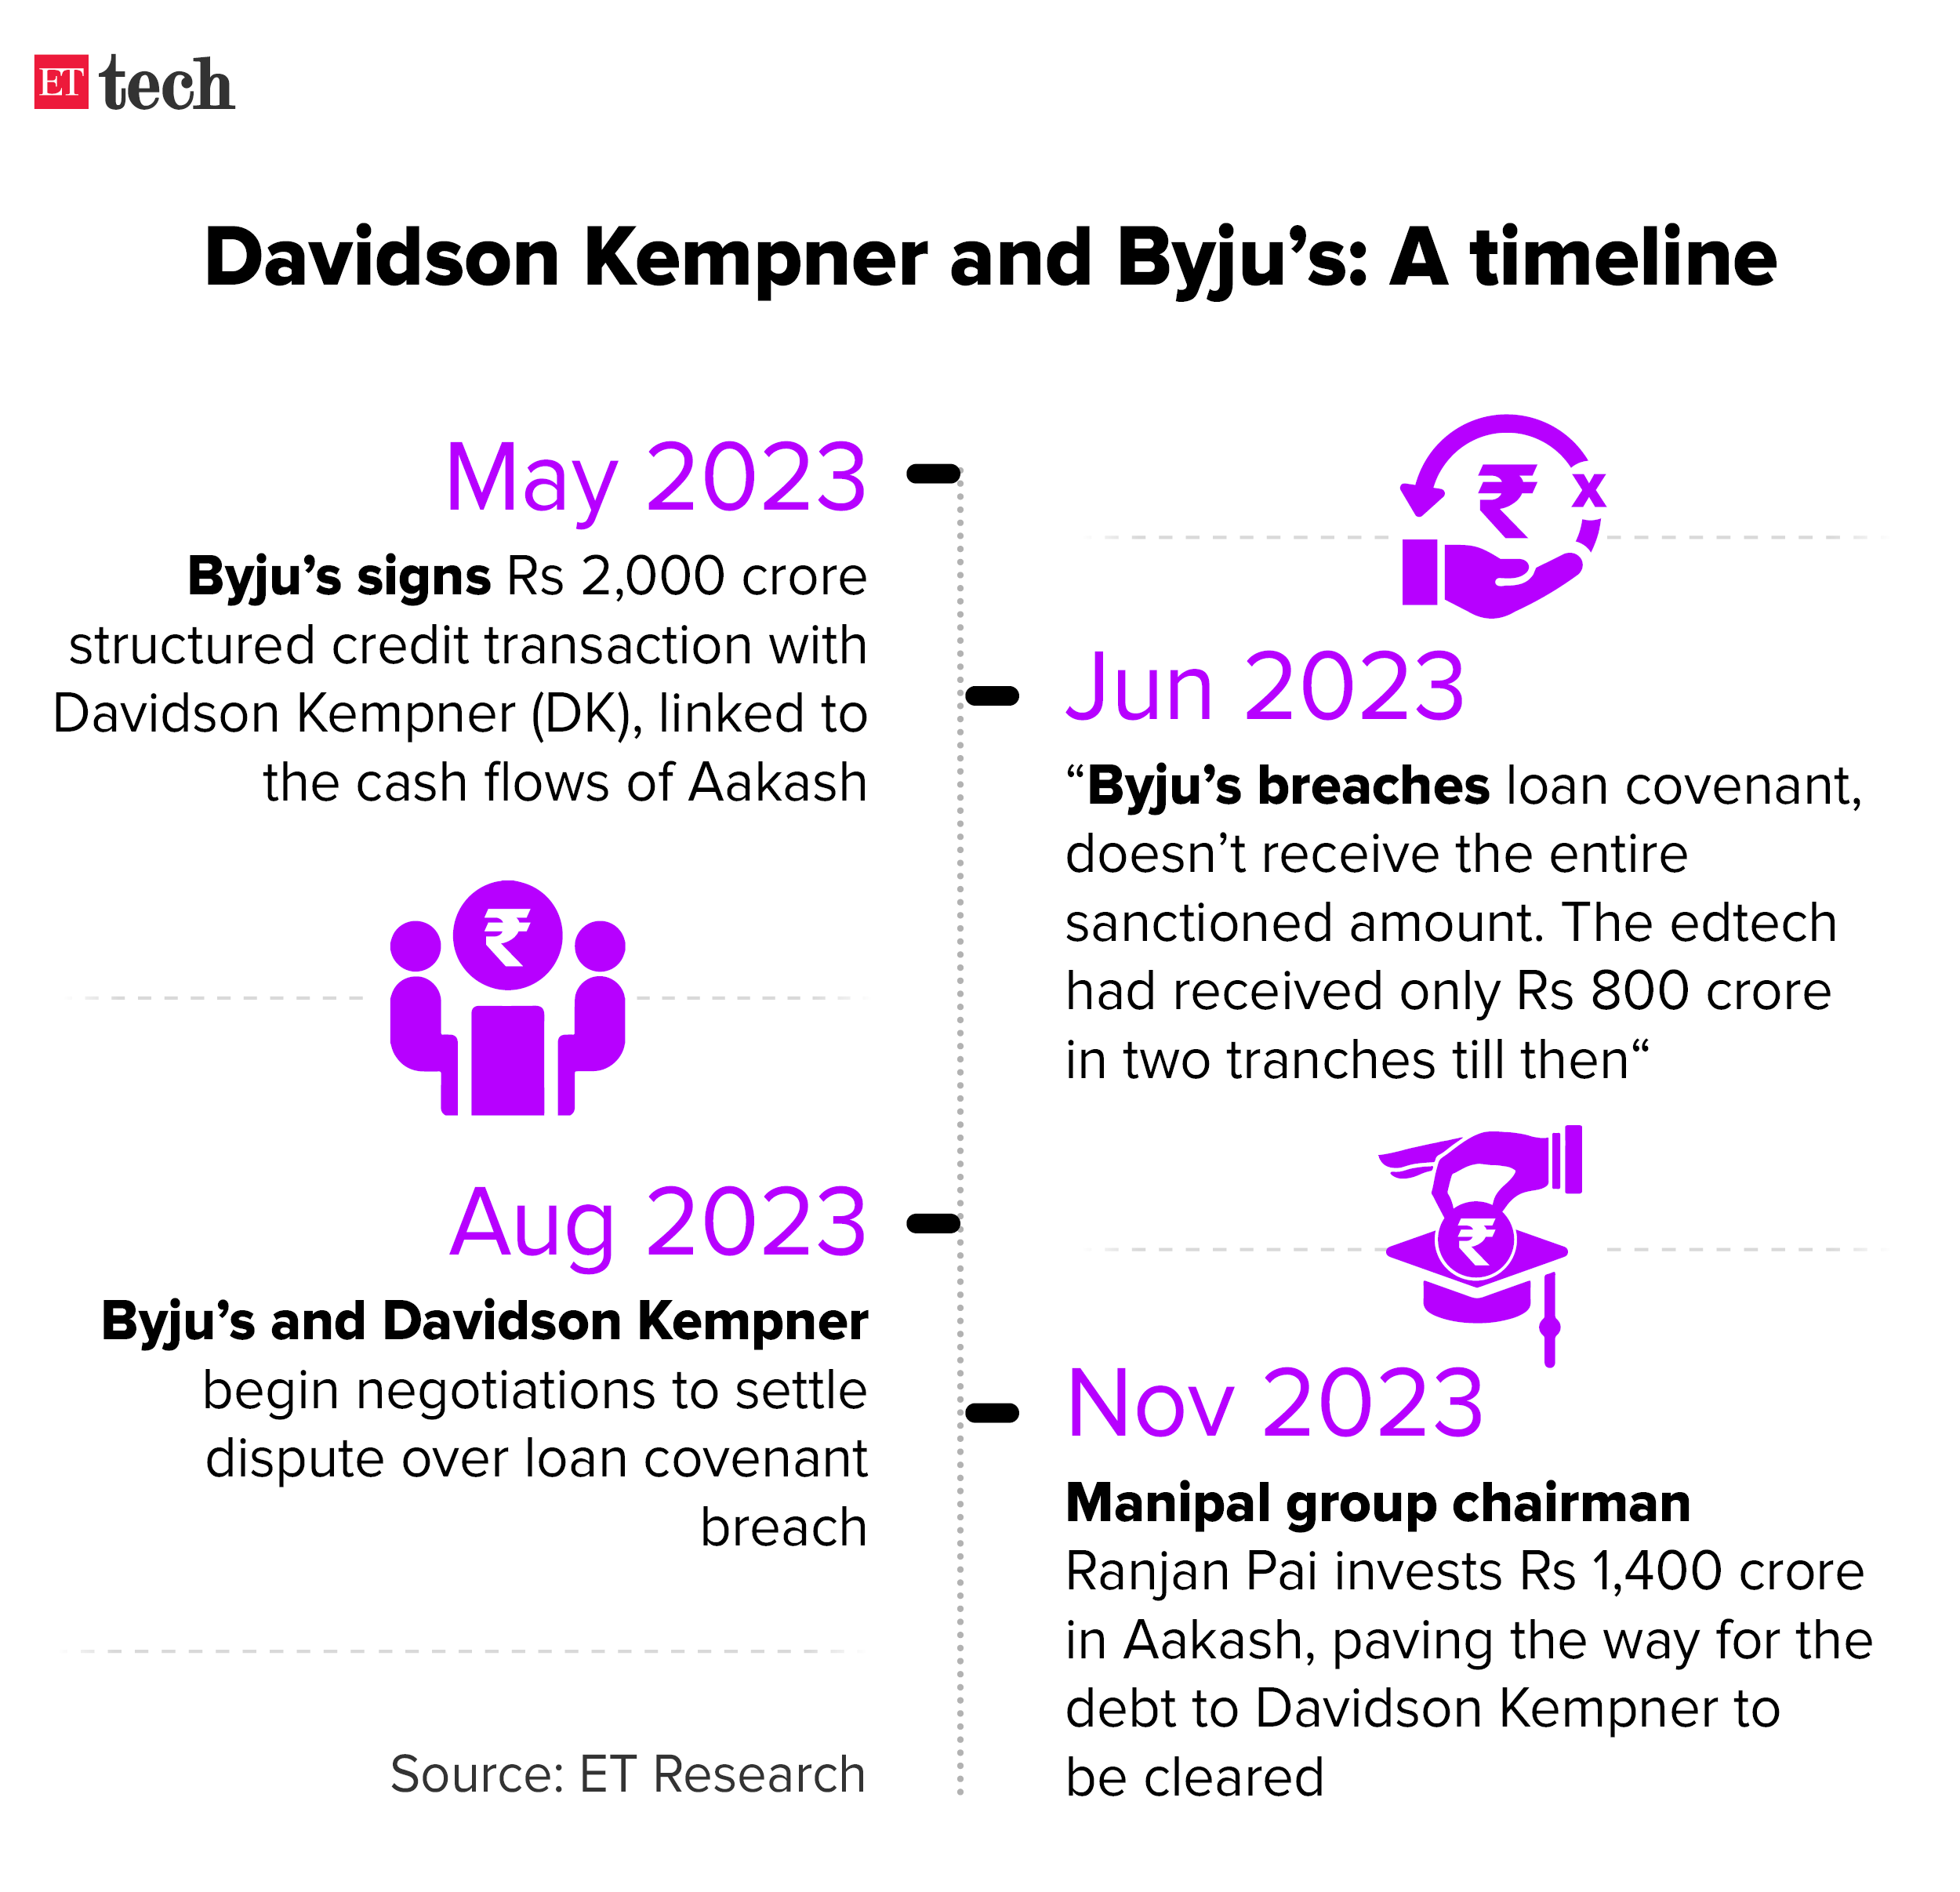 Davidson Kempner and Byjus A timeline_Graphic_ETTECH